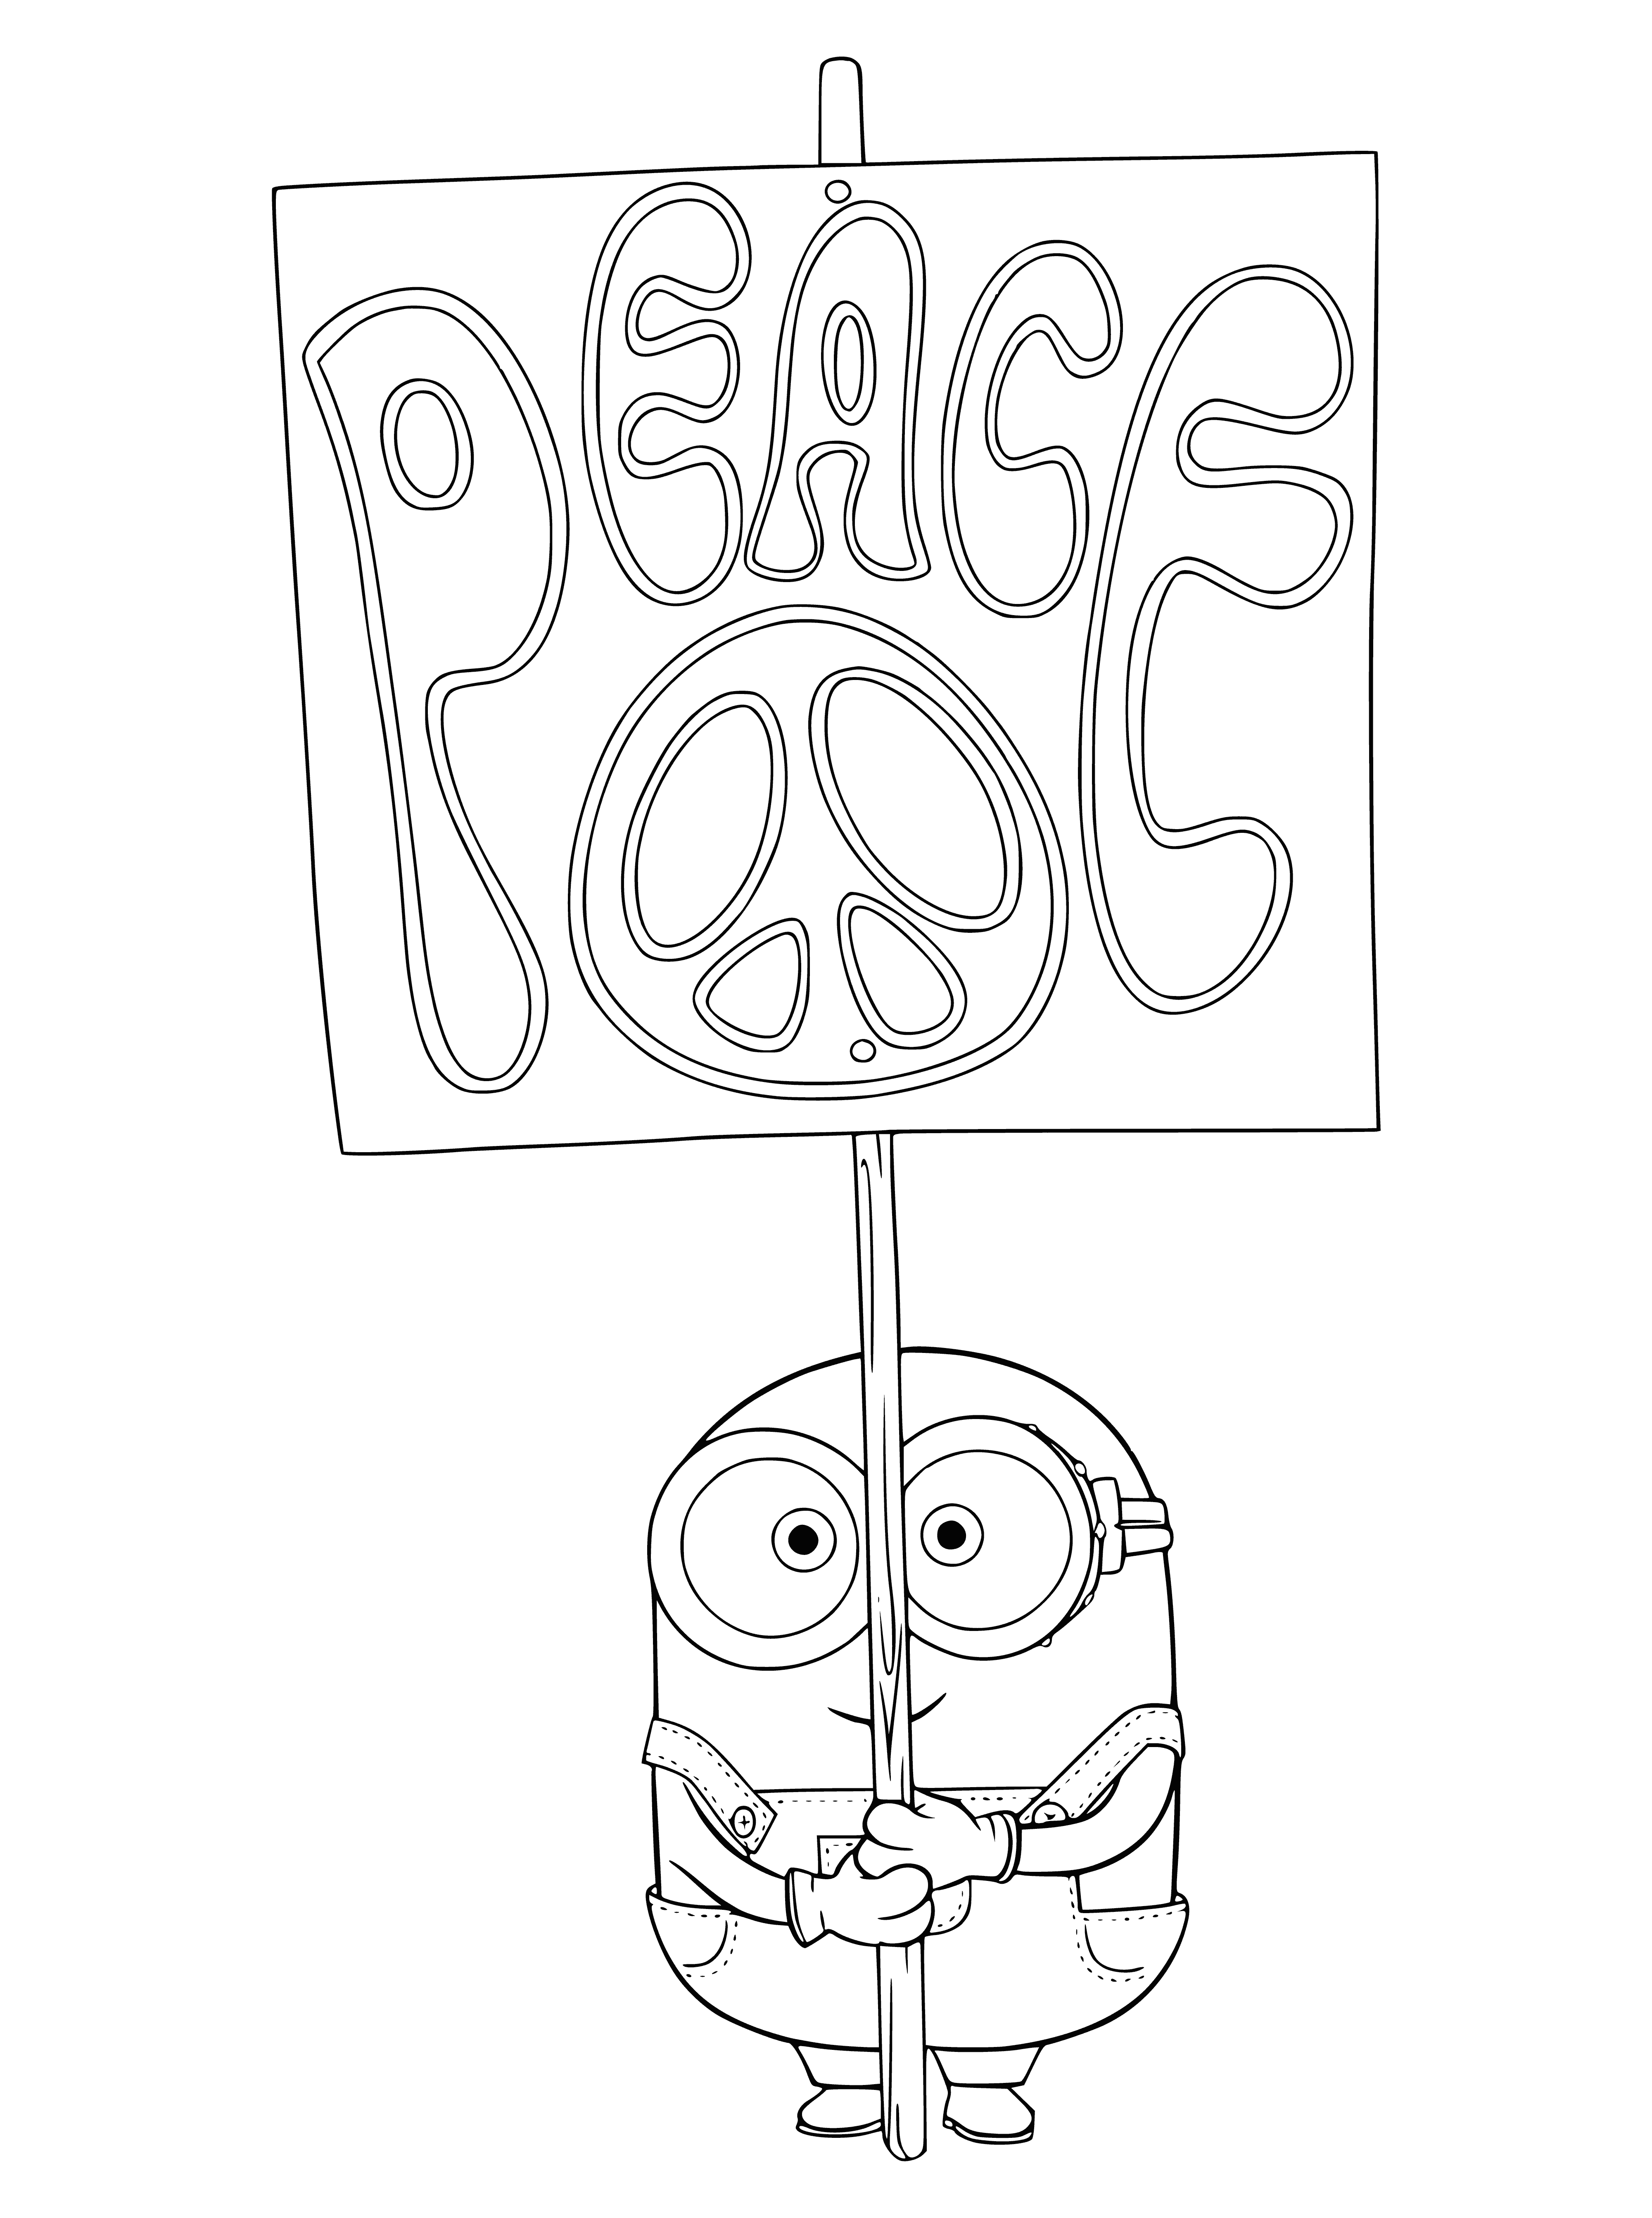 Mignon with poster coloring page